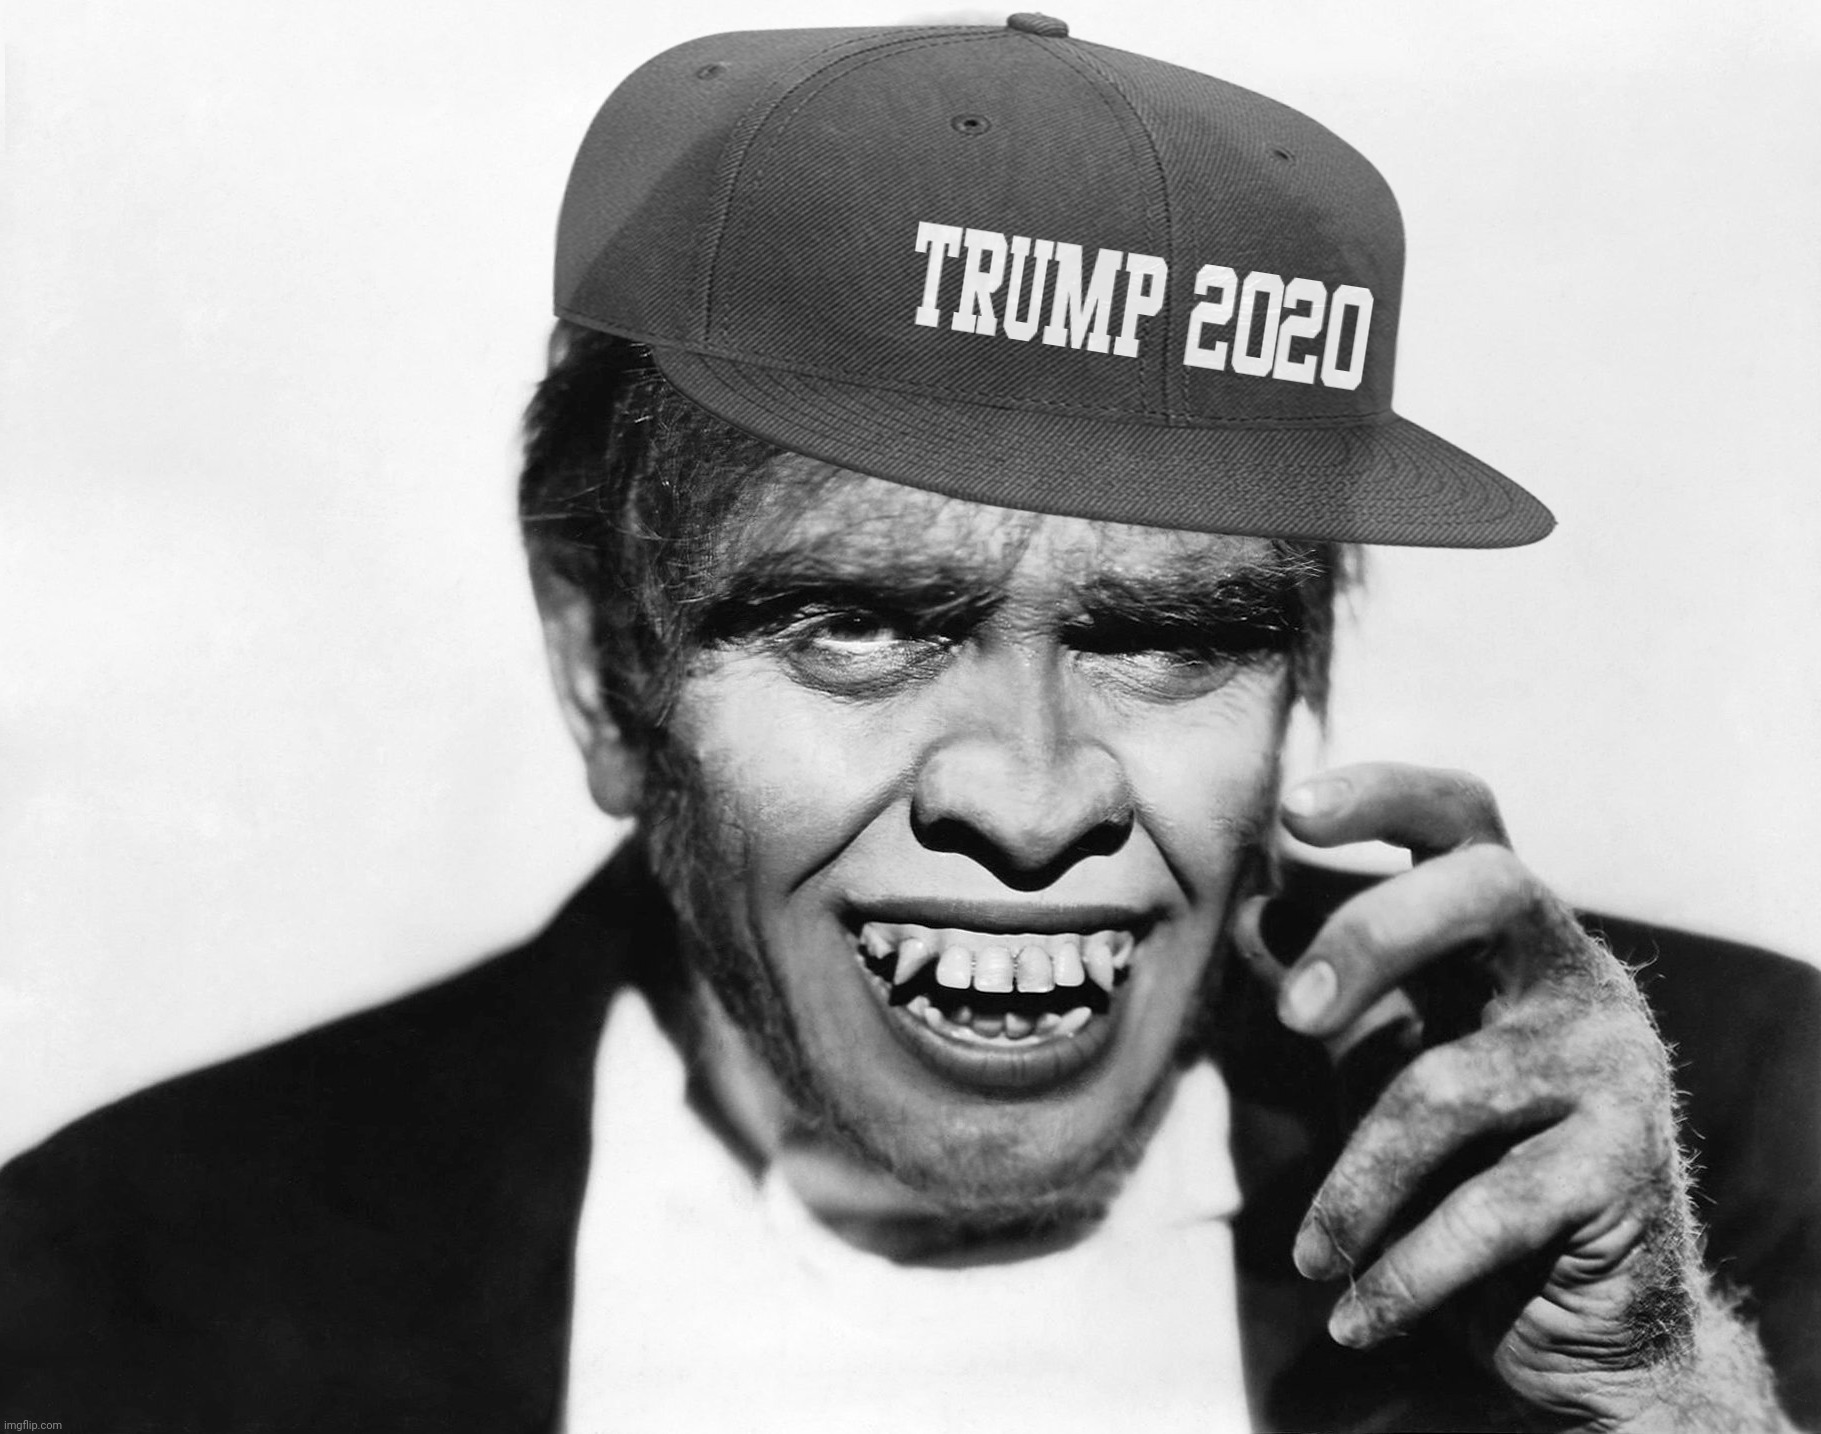 MAGA low brow Trumpite | image tagged in mr hyde,dr jekyll and mr hyde,maga,maga low browss,trump,trump lost | made w/ Imgflip meme maker